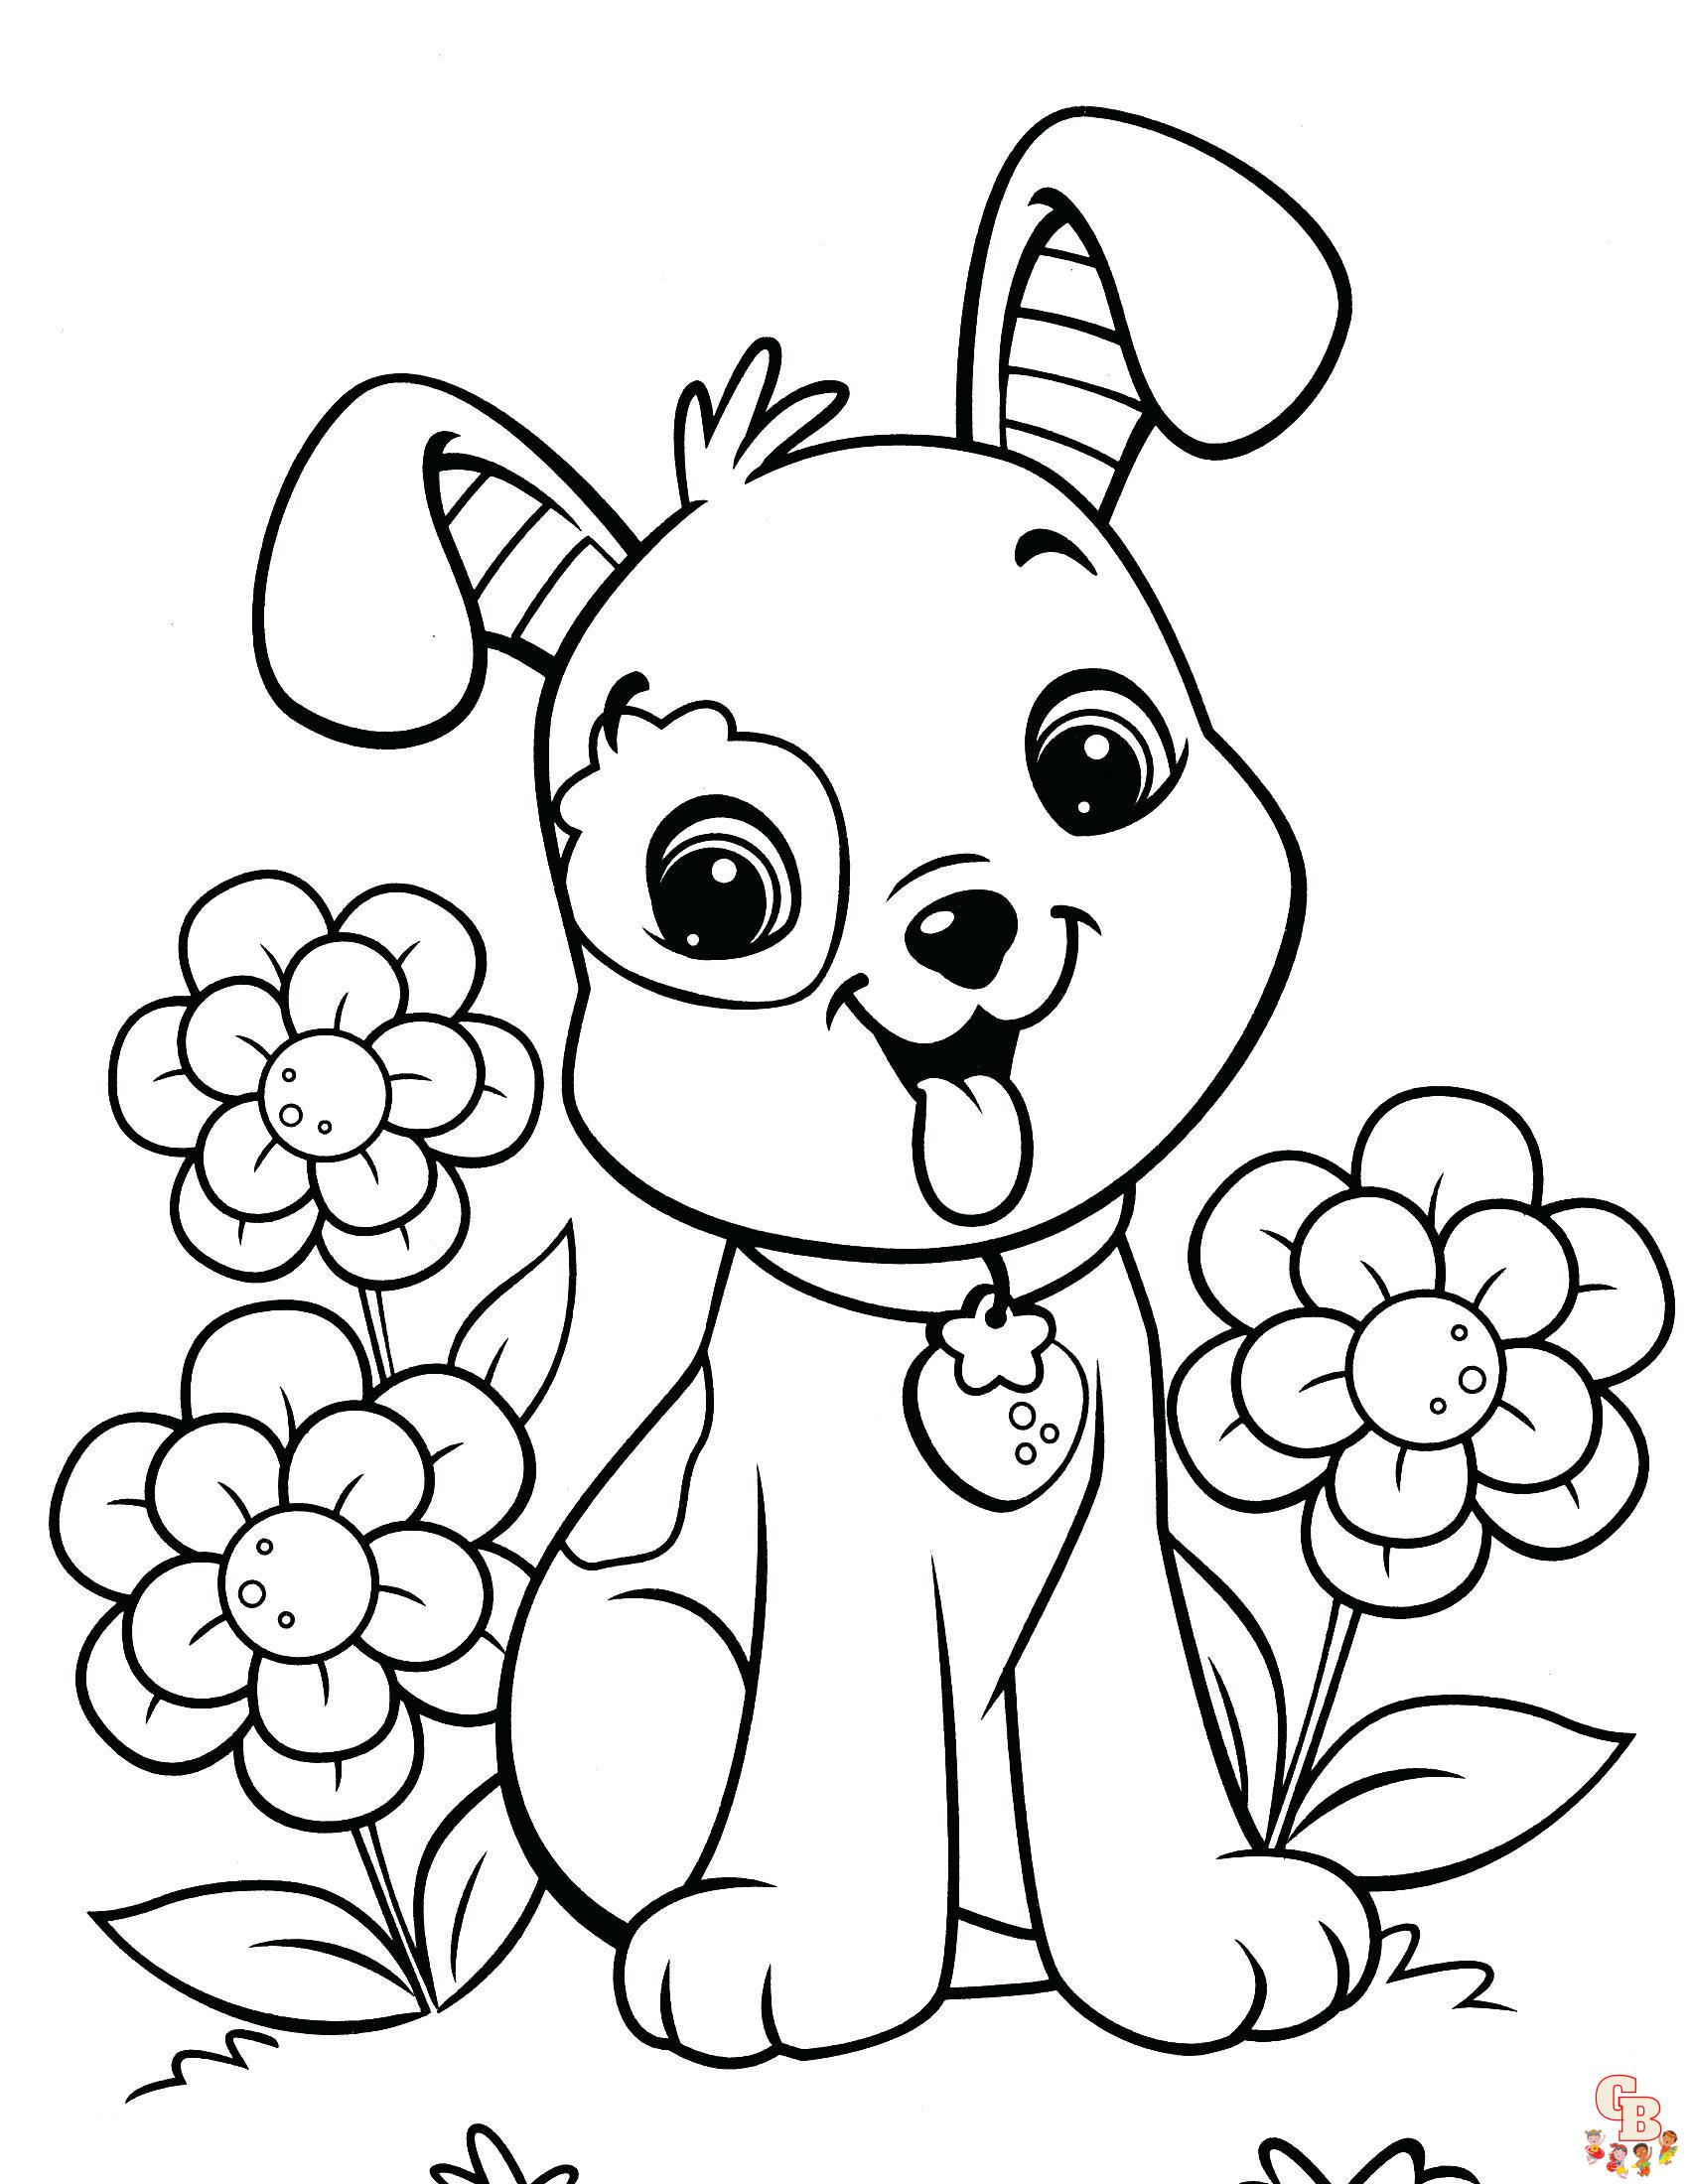 easy cute animal coloring pages